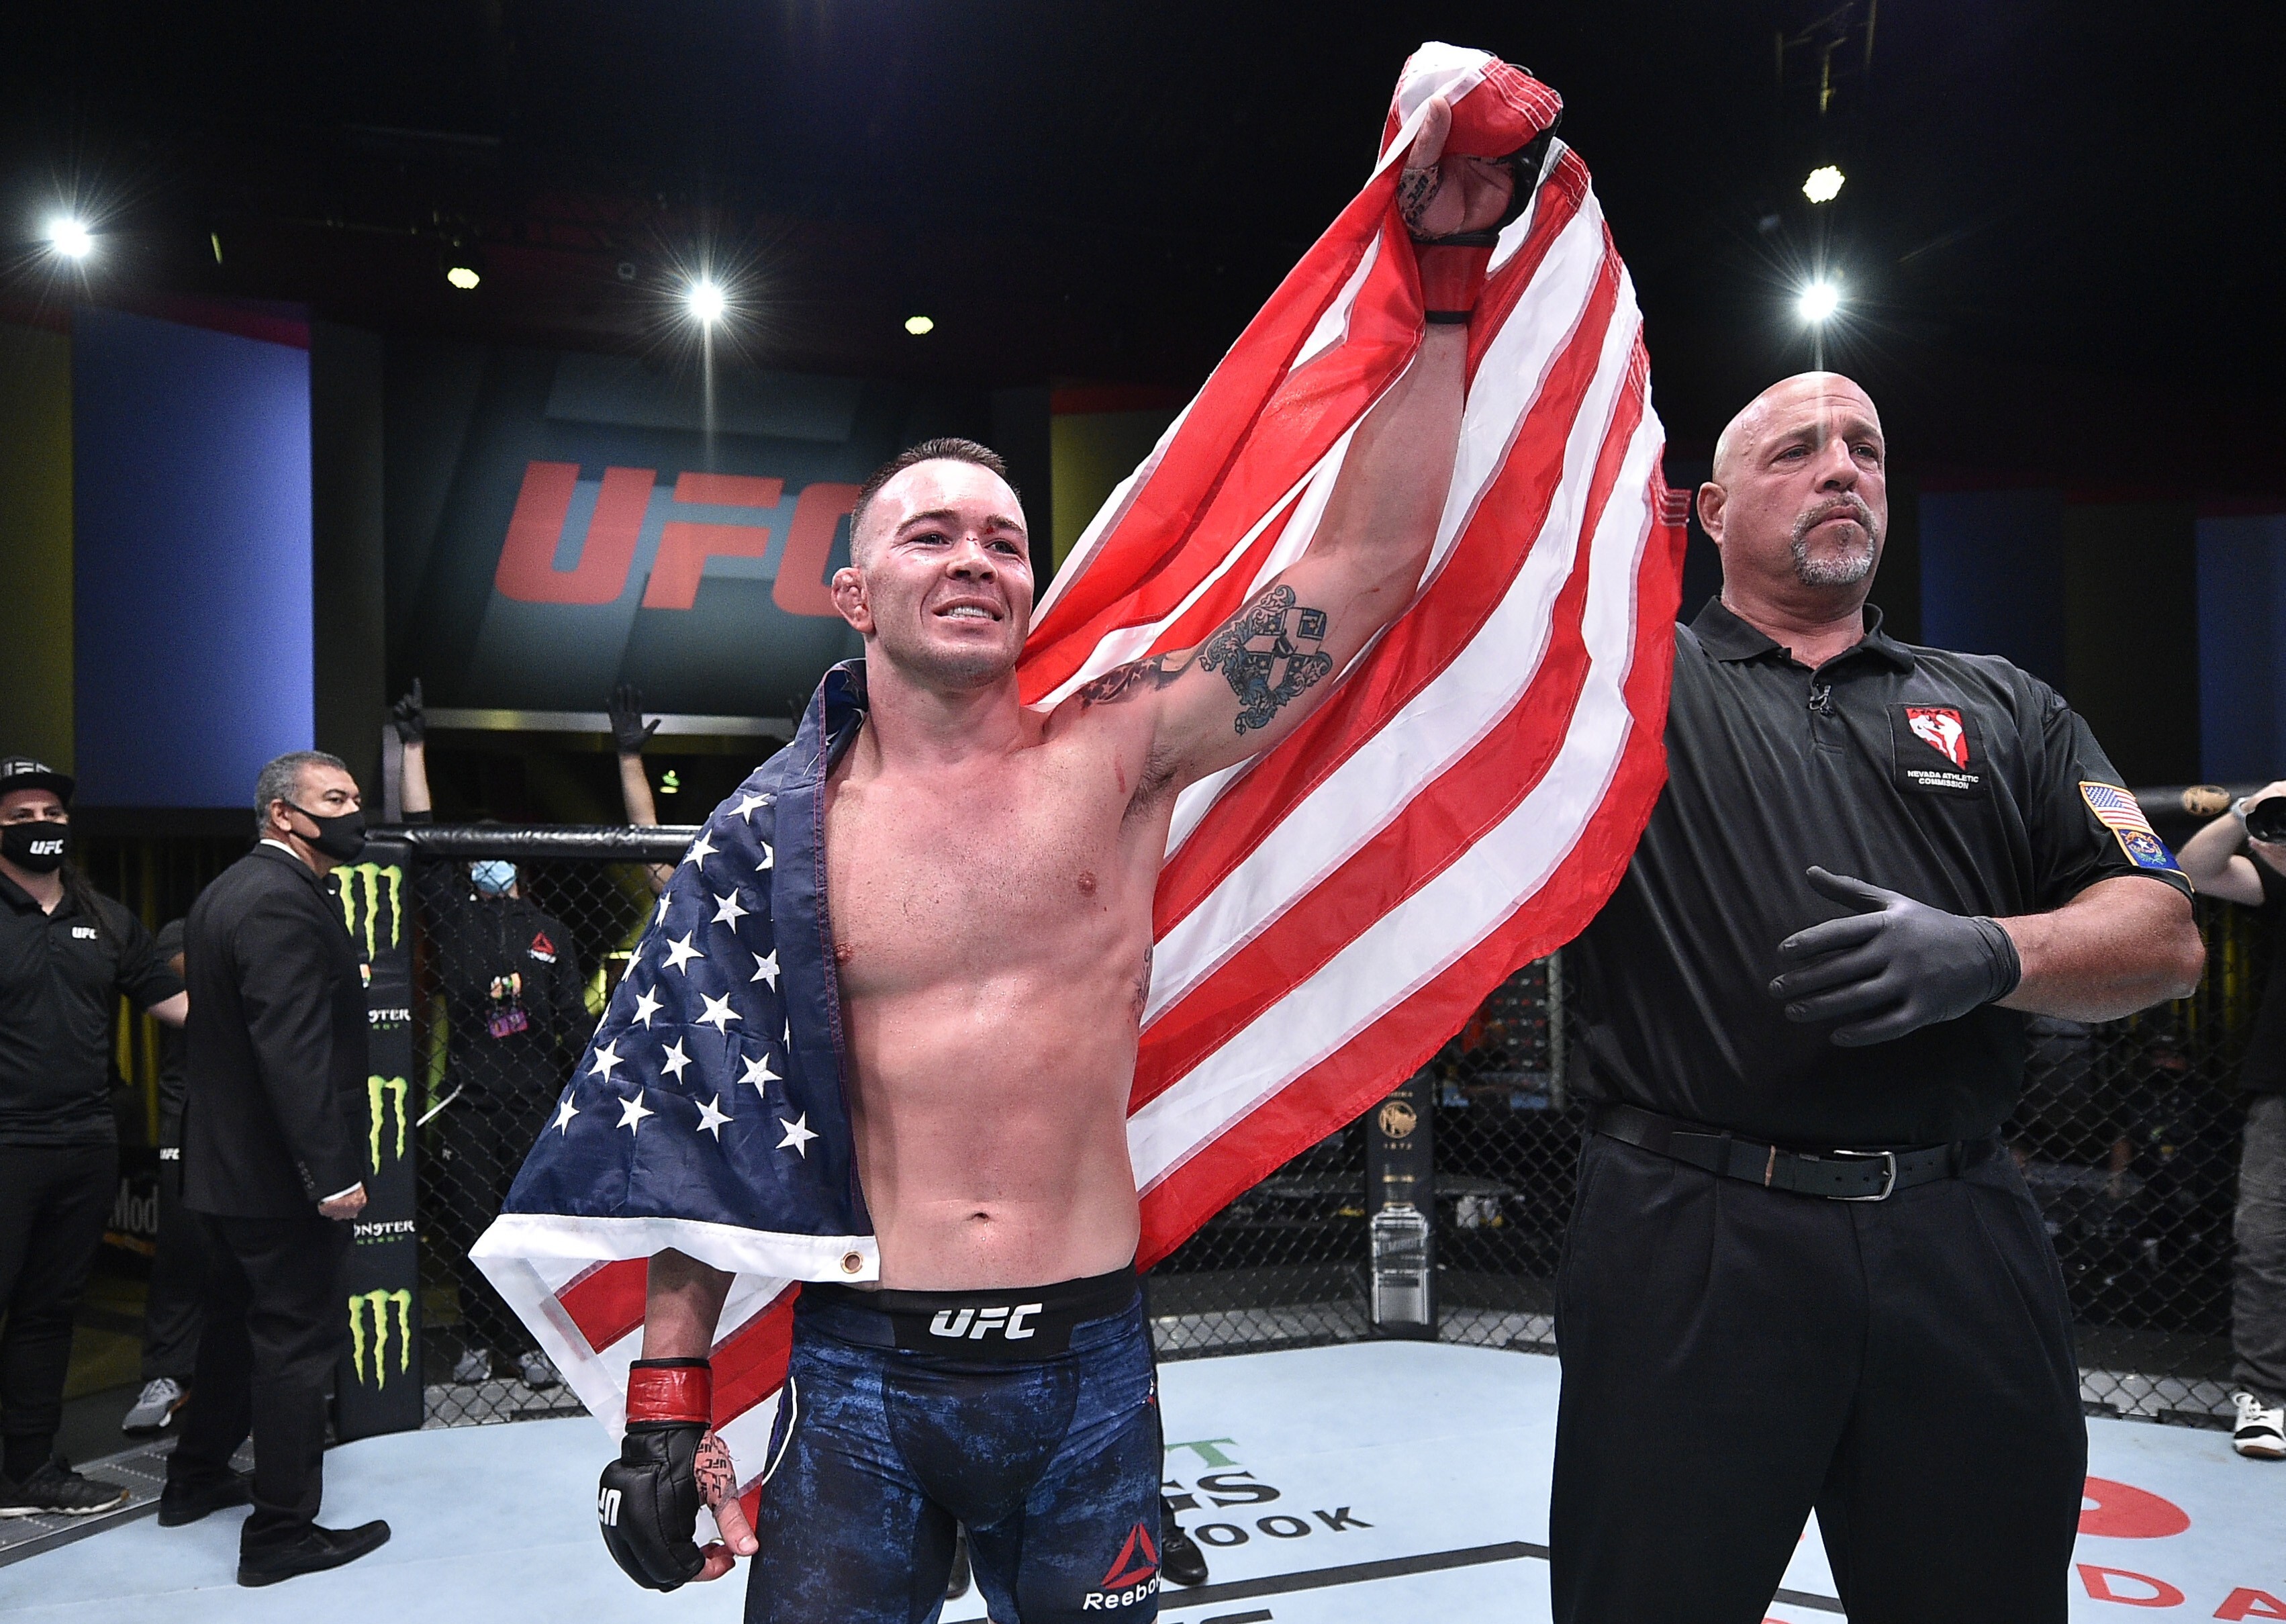 Colby Covington after his TKO victory over Tyron Woodley in their welterweight bout at UFC Apex on September 19 in Las Vegas. Photo: Chris Unger/Zuffa LLC